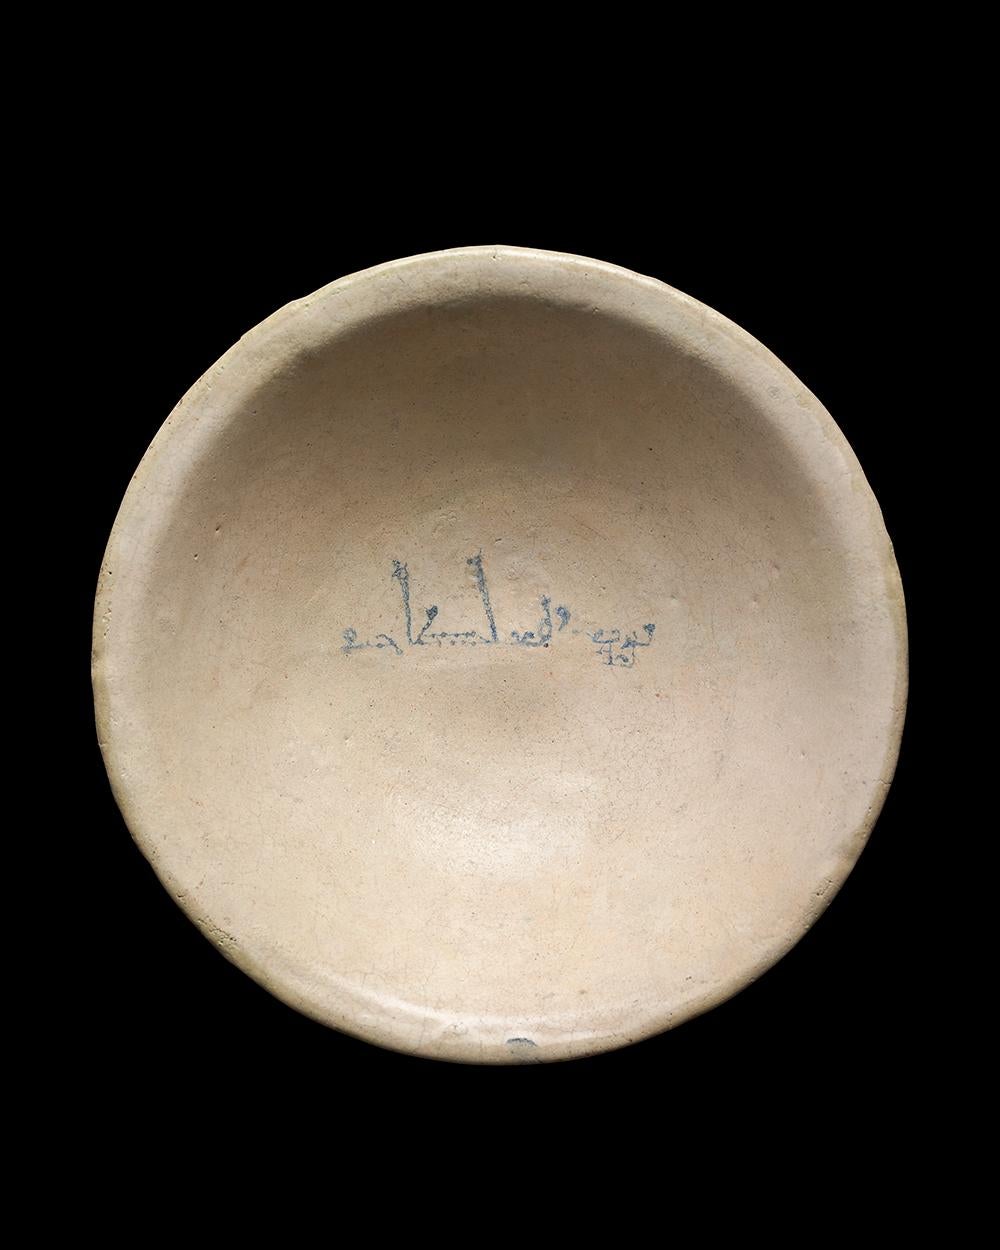 Glazed ceramic bowl with a convex wall and everted rim. With a cobalt blue inscription in the centre which reads, “baraka li-sahibihi” (blessing to its owner). 

Ceramics such as this bowl are among the first examples to incorporate calligraphy as